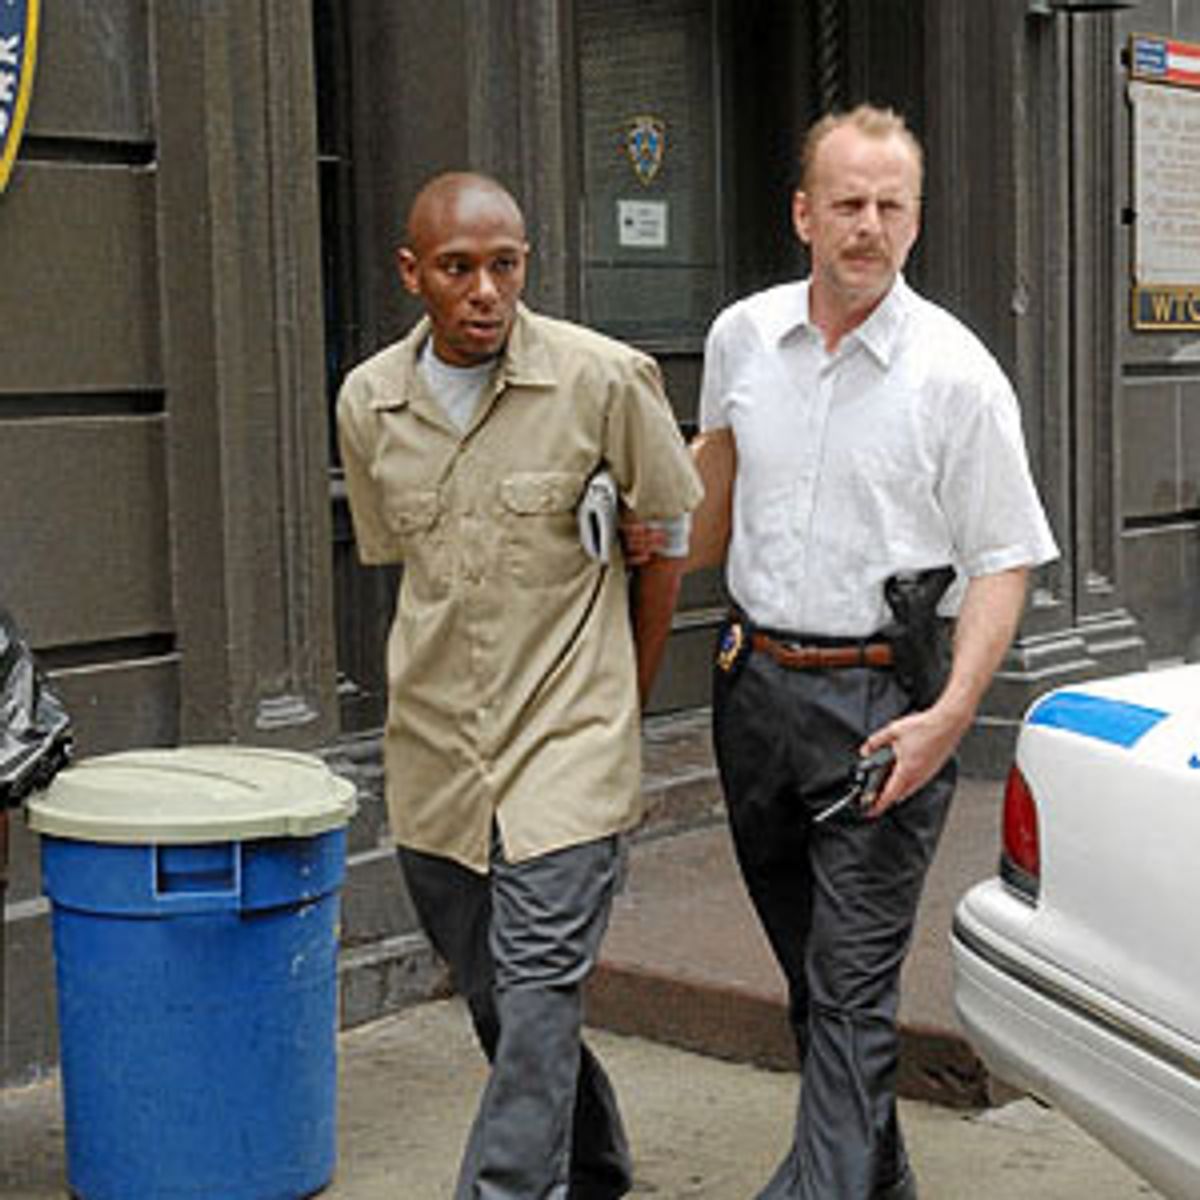 MOS DEF as Eddie Bunker and BRUCE WILLIS as Jack Mosley star in Alcon Entertainment and Millennium Filmsâ action thriller â16 Blocks,â also starring David Morse and distributed by Warner Bros. Pictures.
PHOTOGRAPHS TO BE USED SOLELY FOR ADVERTISING, PROMOTION, PUBLICITY OR REVIEWS OF THIS SPECIFIC MOTION PICTURE AND TO REMAIN THE PROPERTY OF THE STUDIO. NOT FOR SALE OR REDISTRIBUTION. 